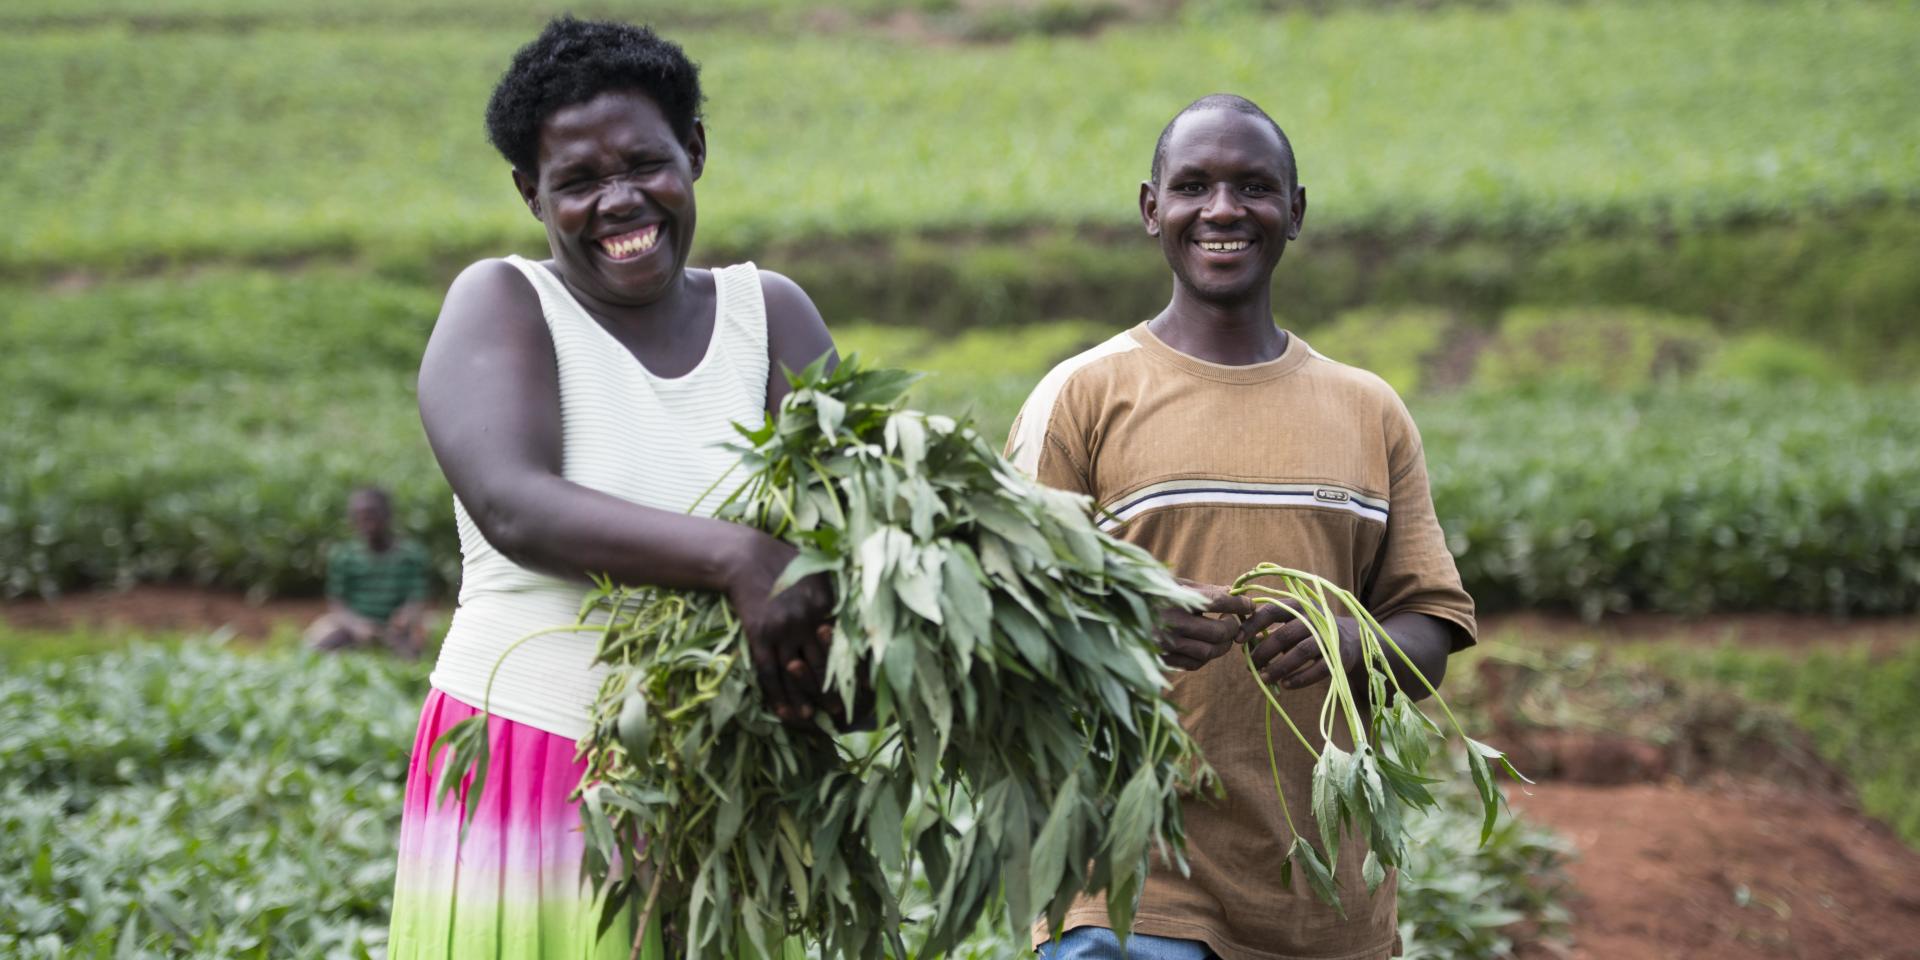 Jean Claude (R) is pictured selling some Kabode Orange Flesh Sweet Potato vines to a neighbour in rural Rwanda. Photo: CIP.